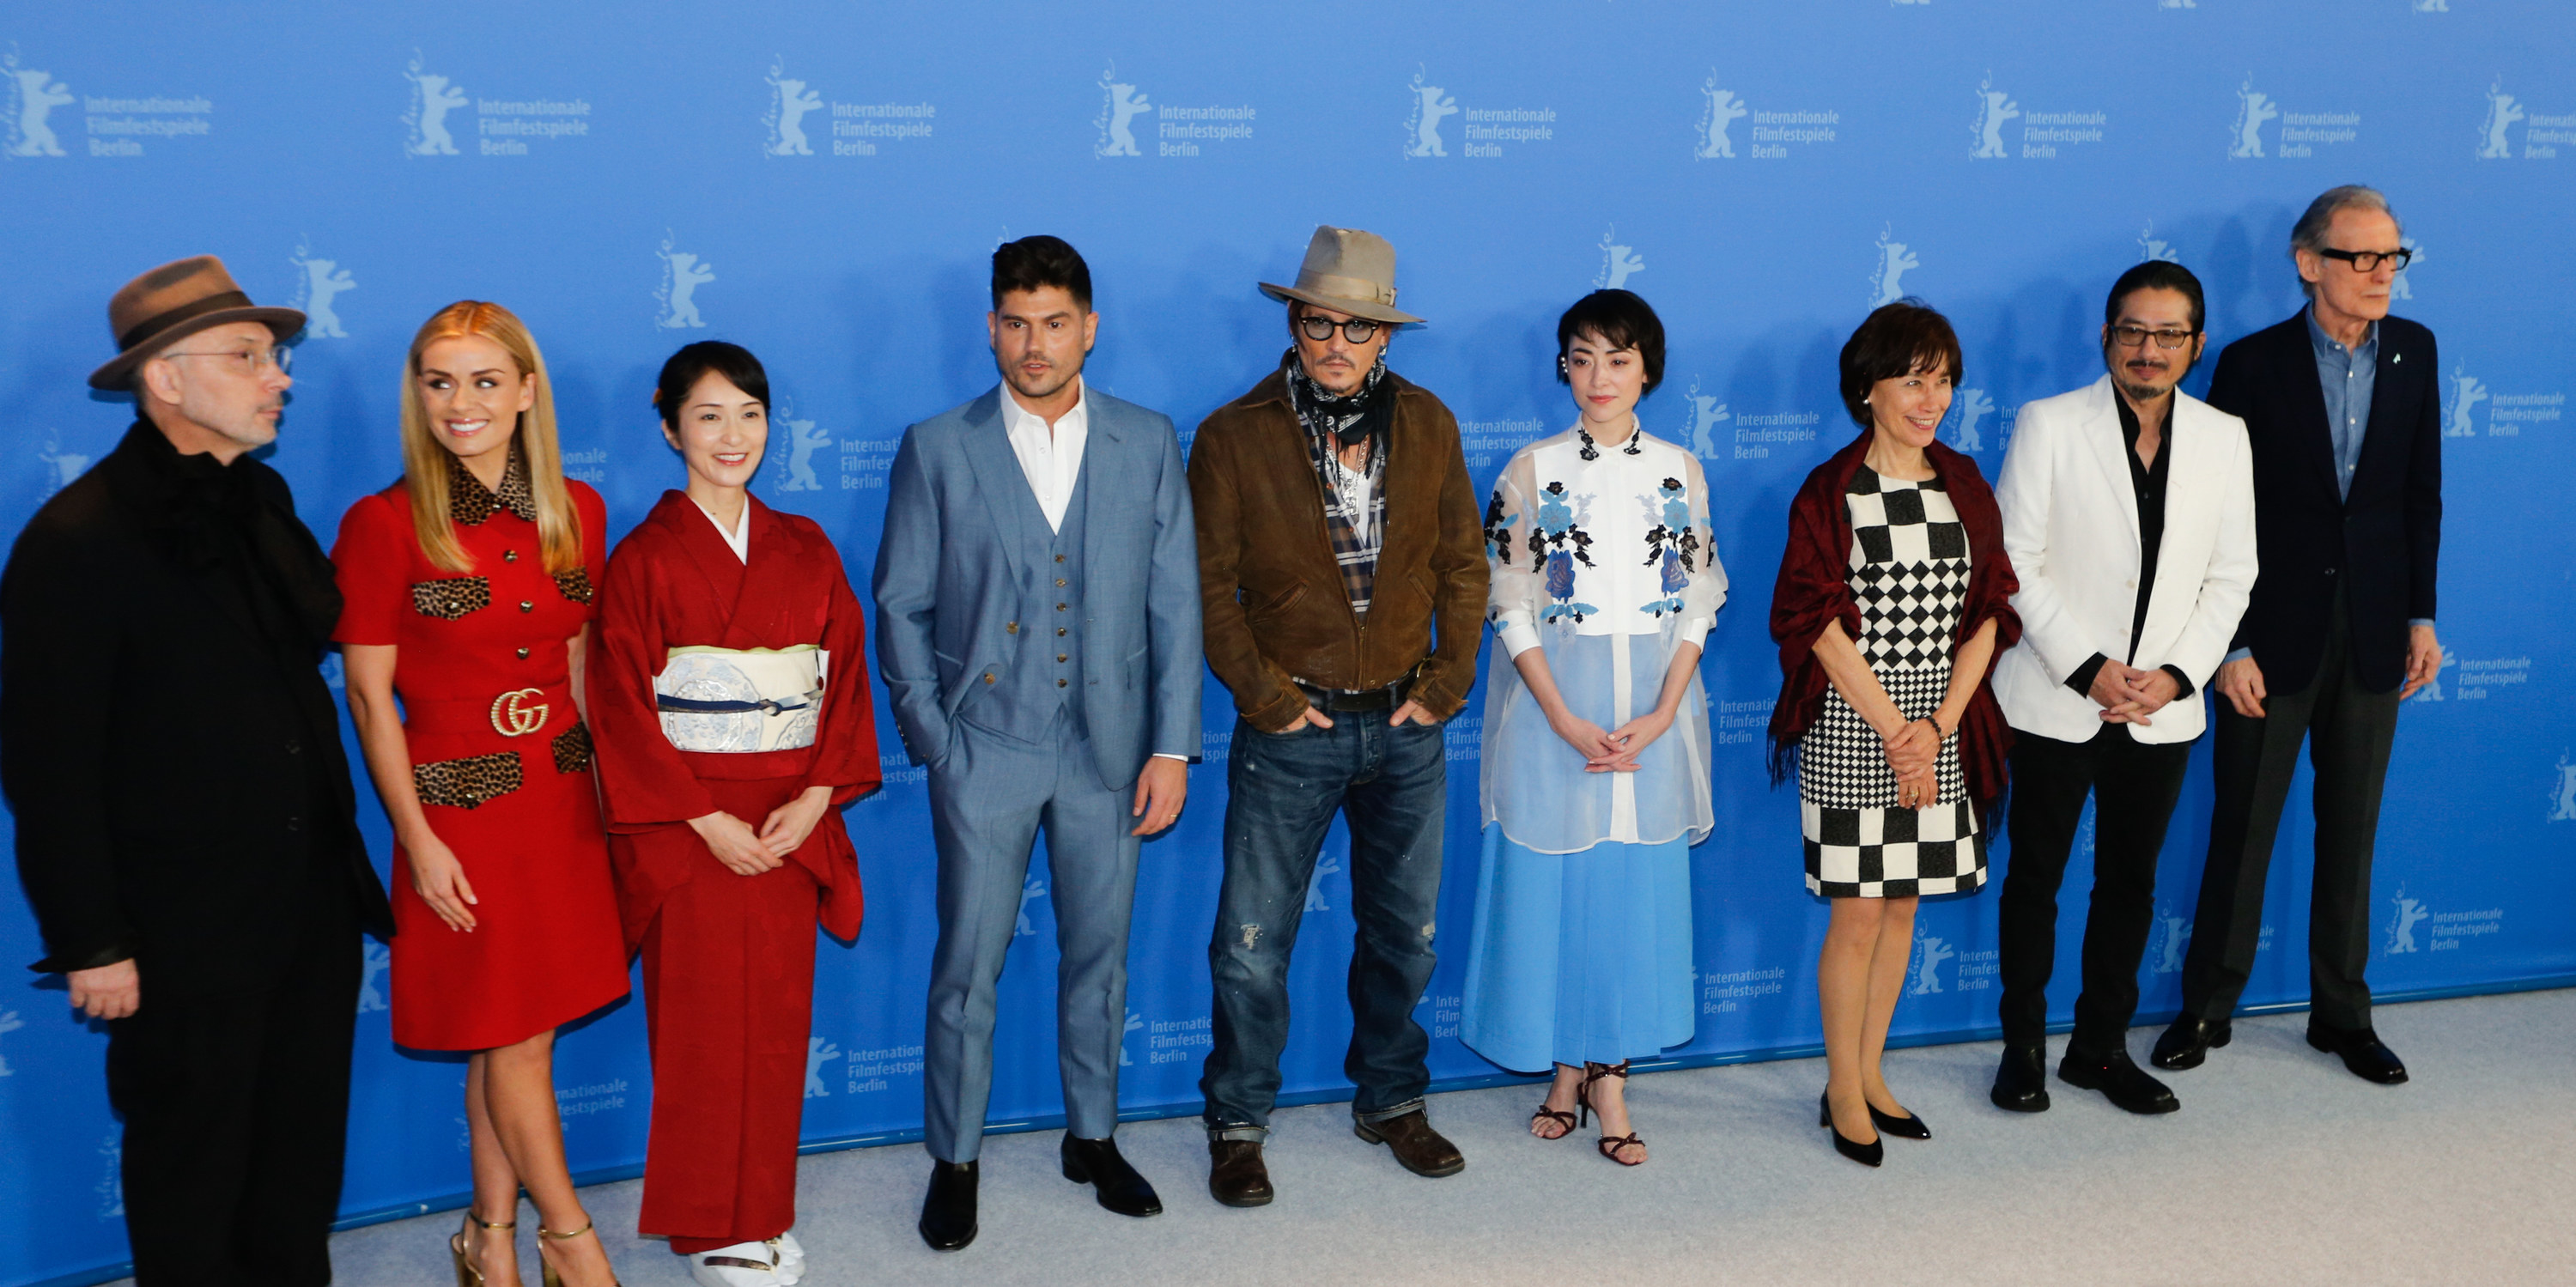 Cast and crew members of &quot;Minamata&quot; pose together as they attend the Berlinale International Film Festival in 2020